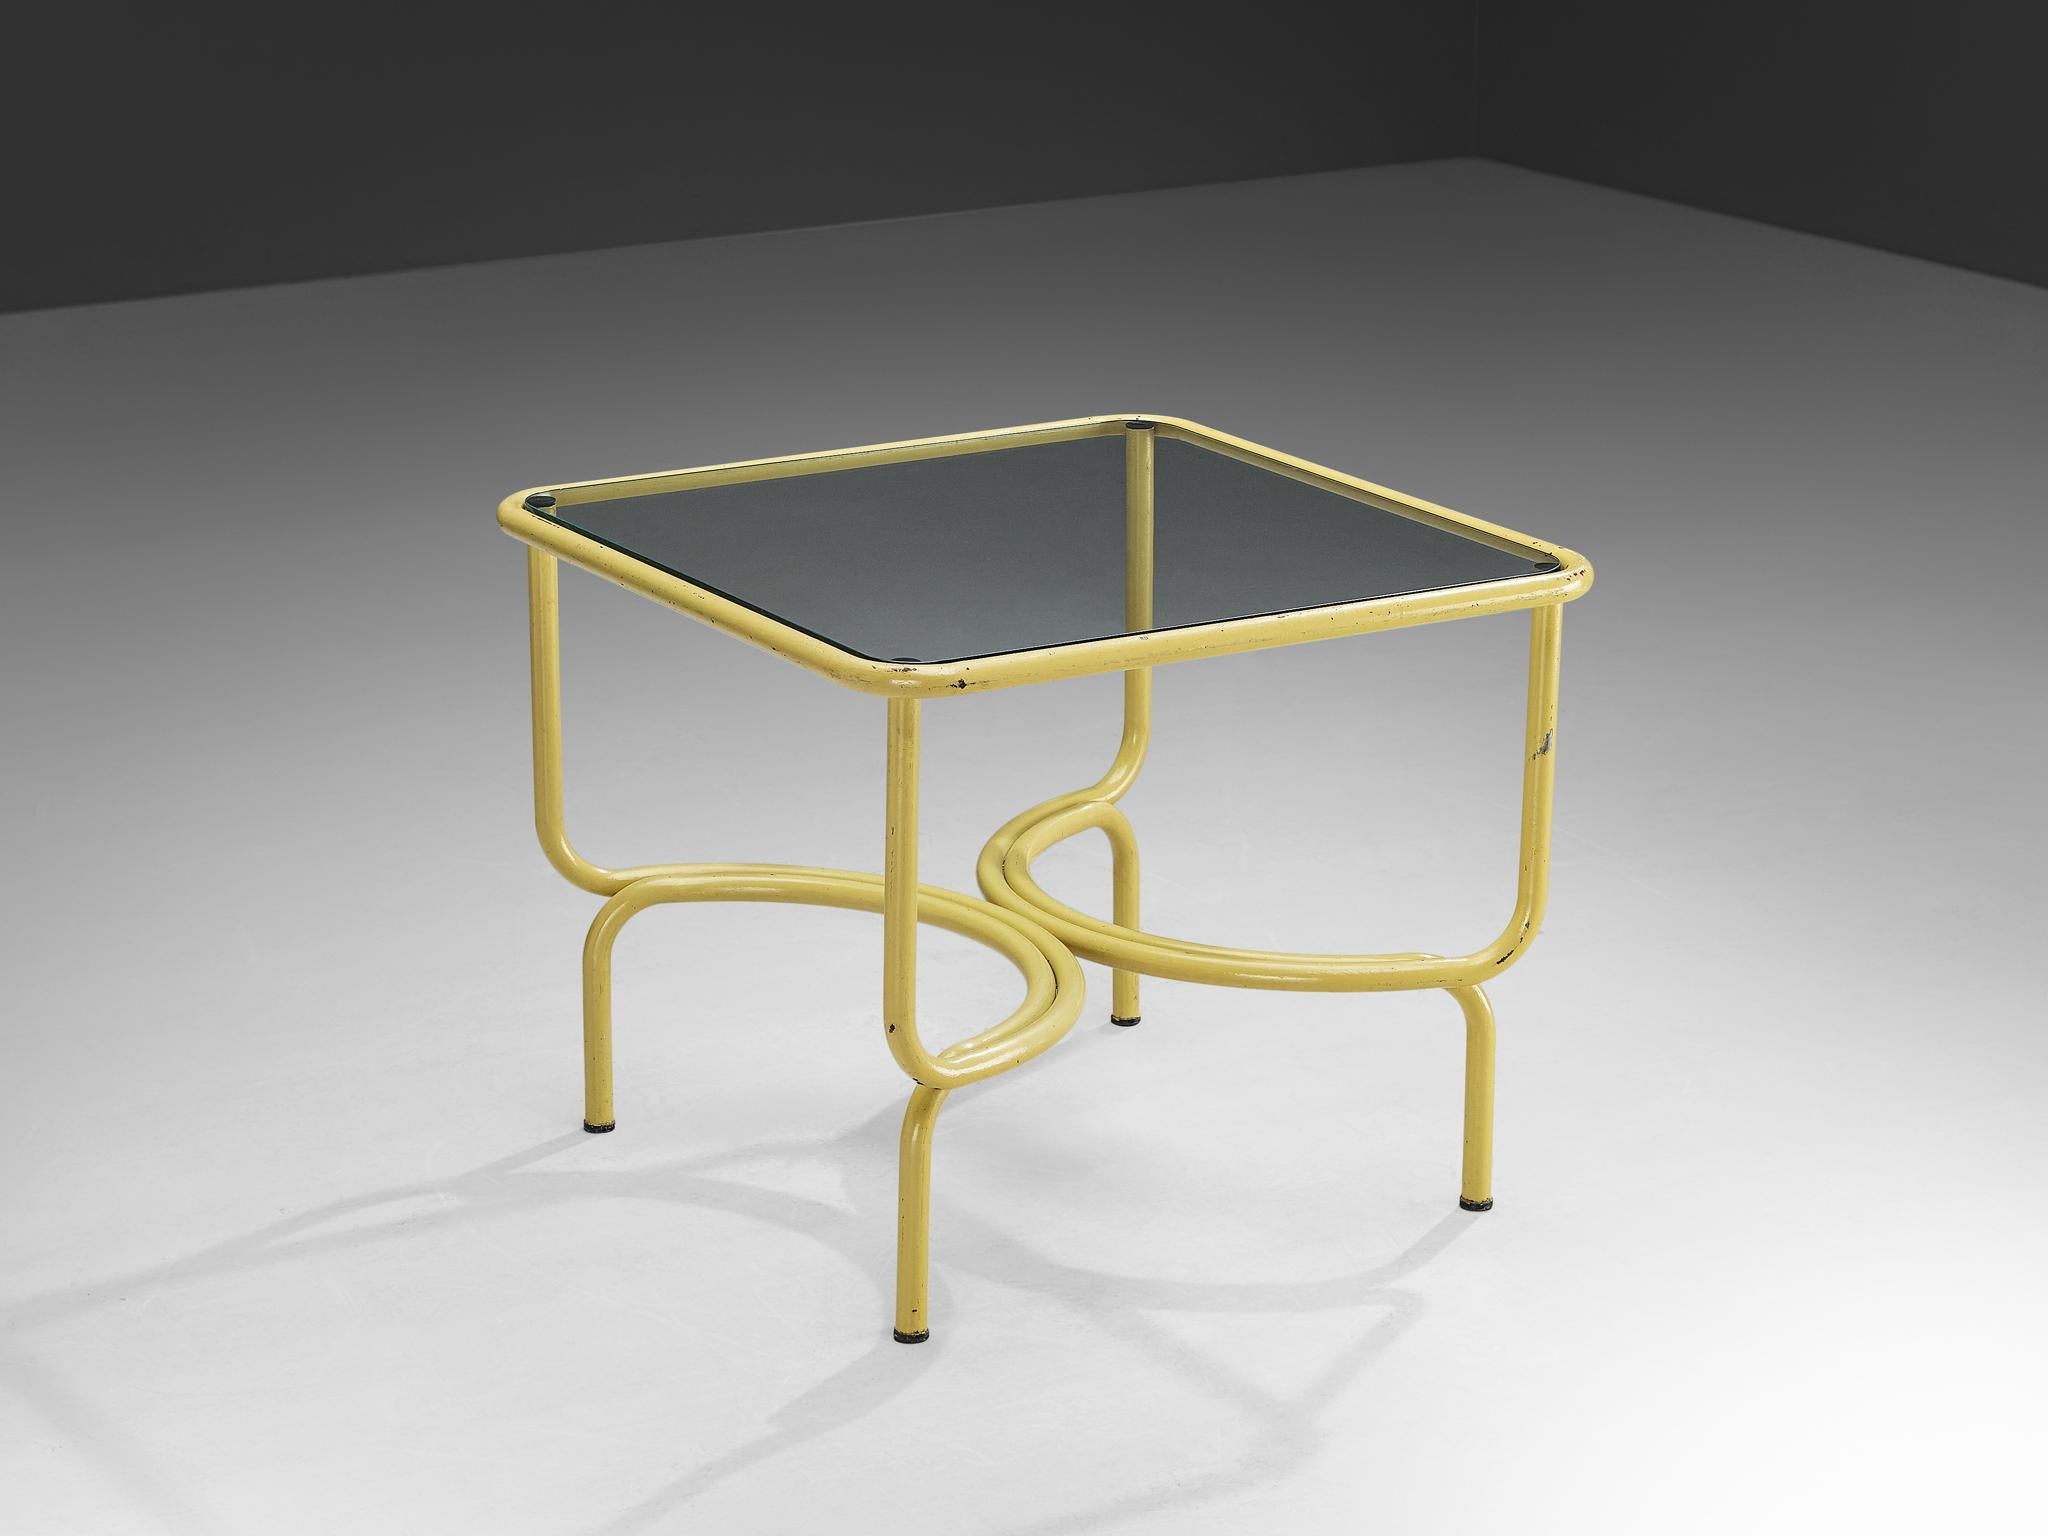 Gae Aulenti for Poltronova Locus Solus, yellow lacquered metal, Italy, 1963

The Locus Solus table, a design crafted by the visionary Gae Aulenti in 1963. This iconic piece, made in yellow lacquered metal, is exiting in its form and versatile,